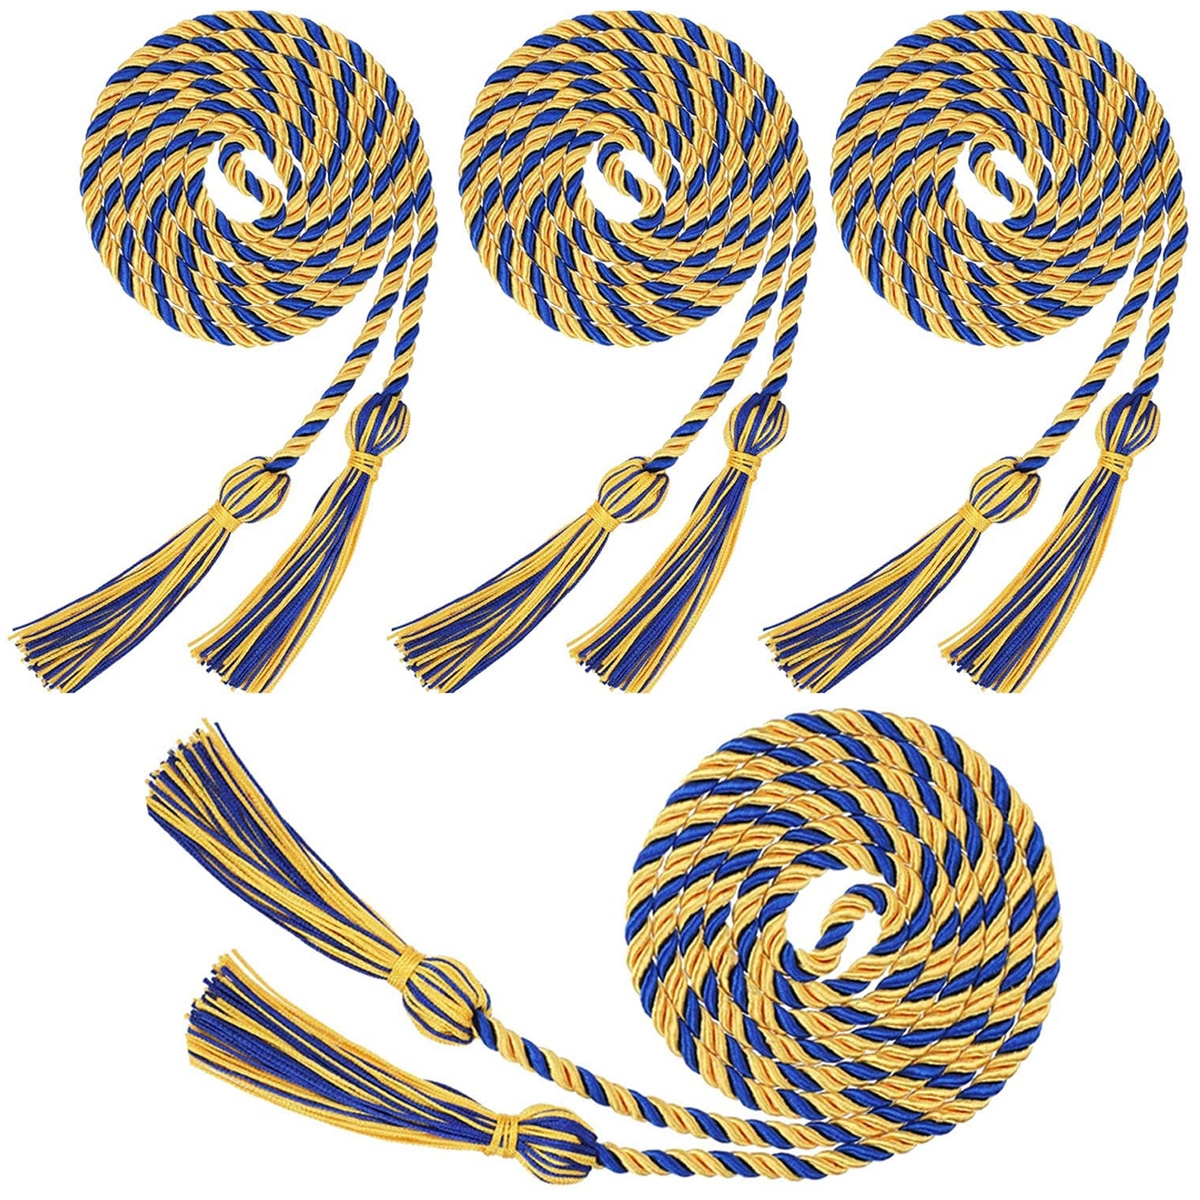 4 Pieces Graduation Cords Yarn Honor Cords with Tassel for High School College Graduation Gold  blue